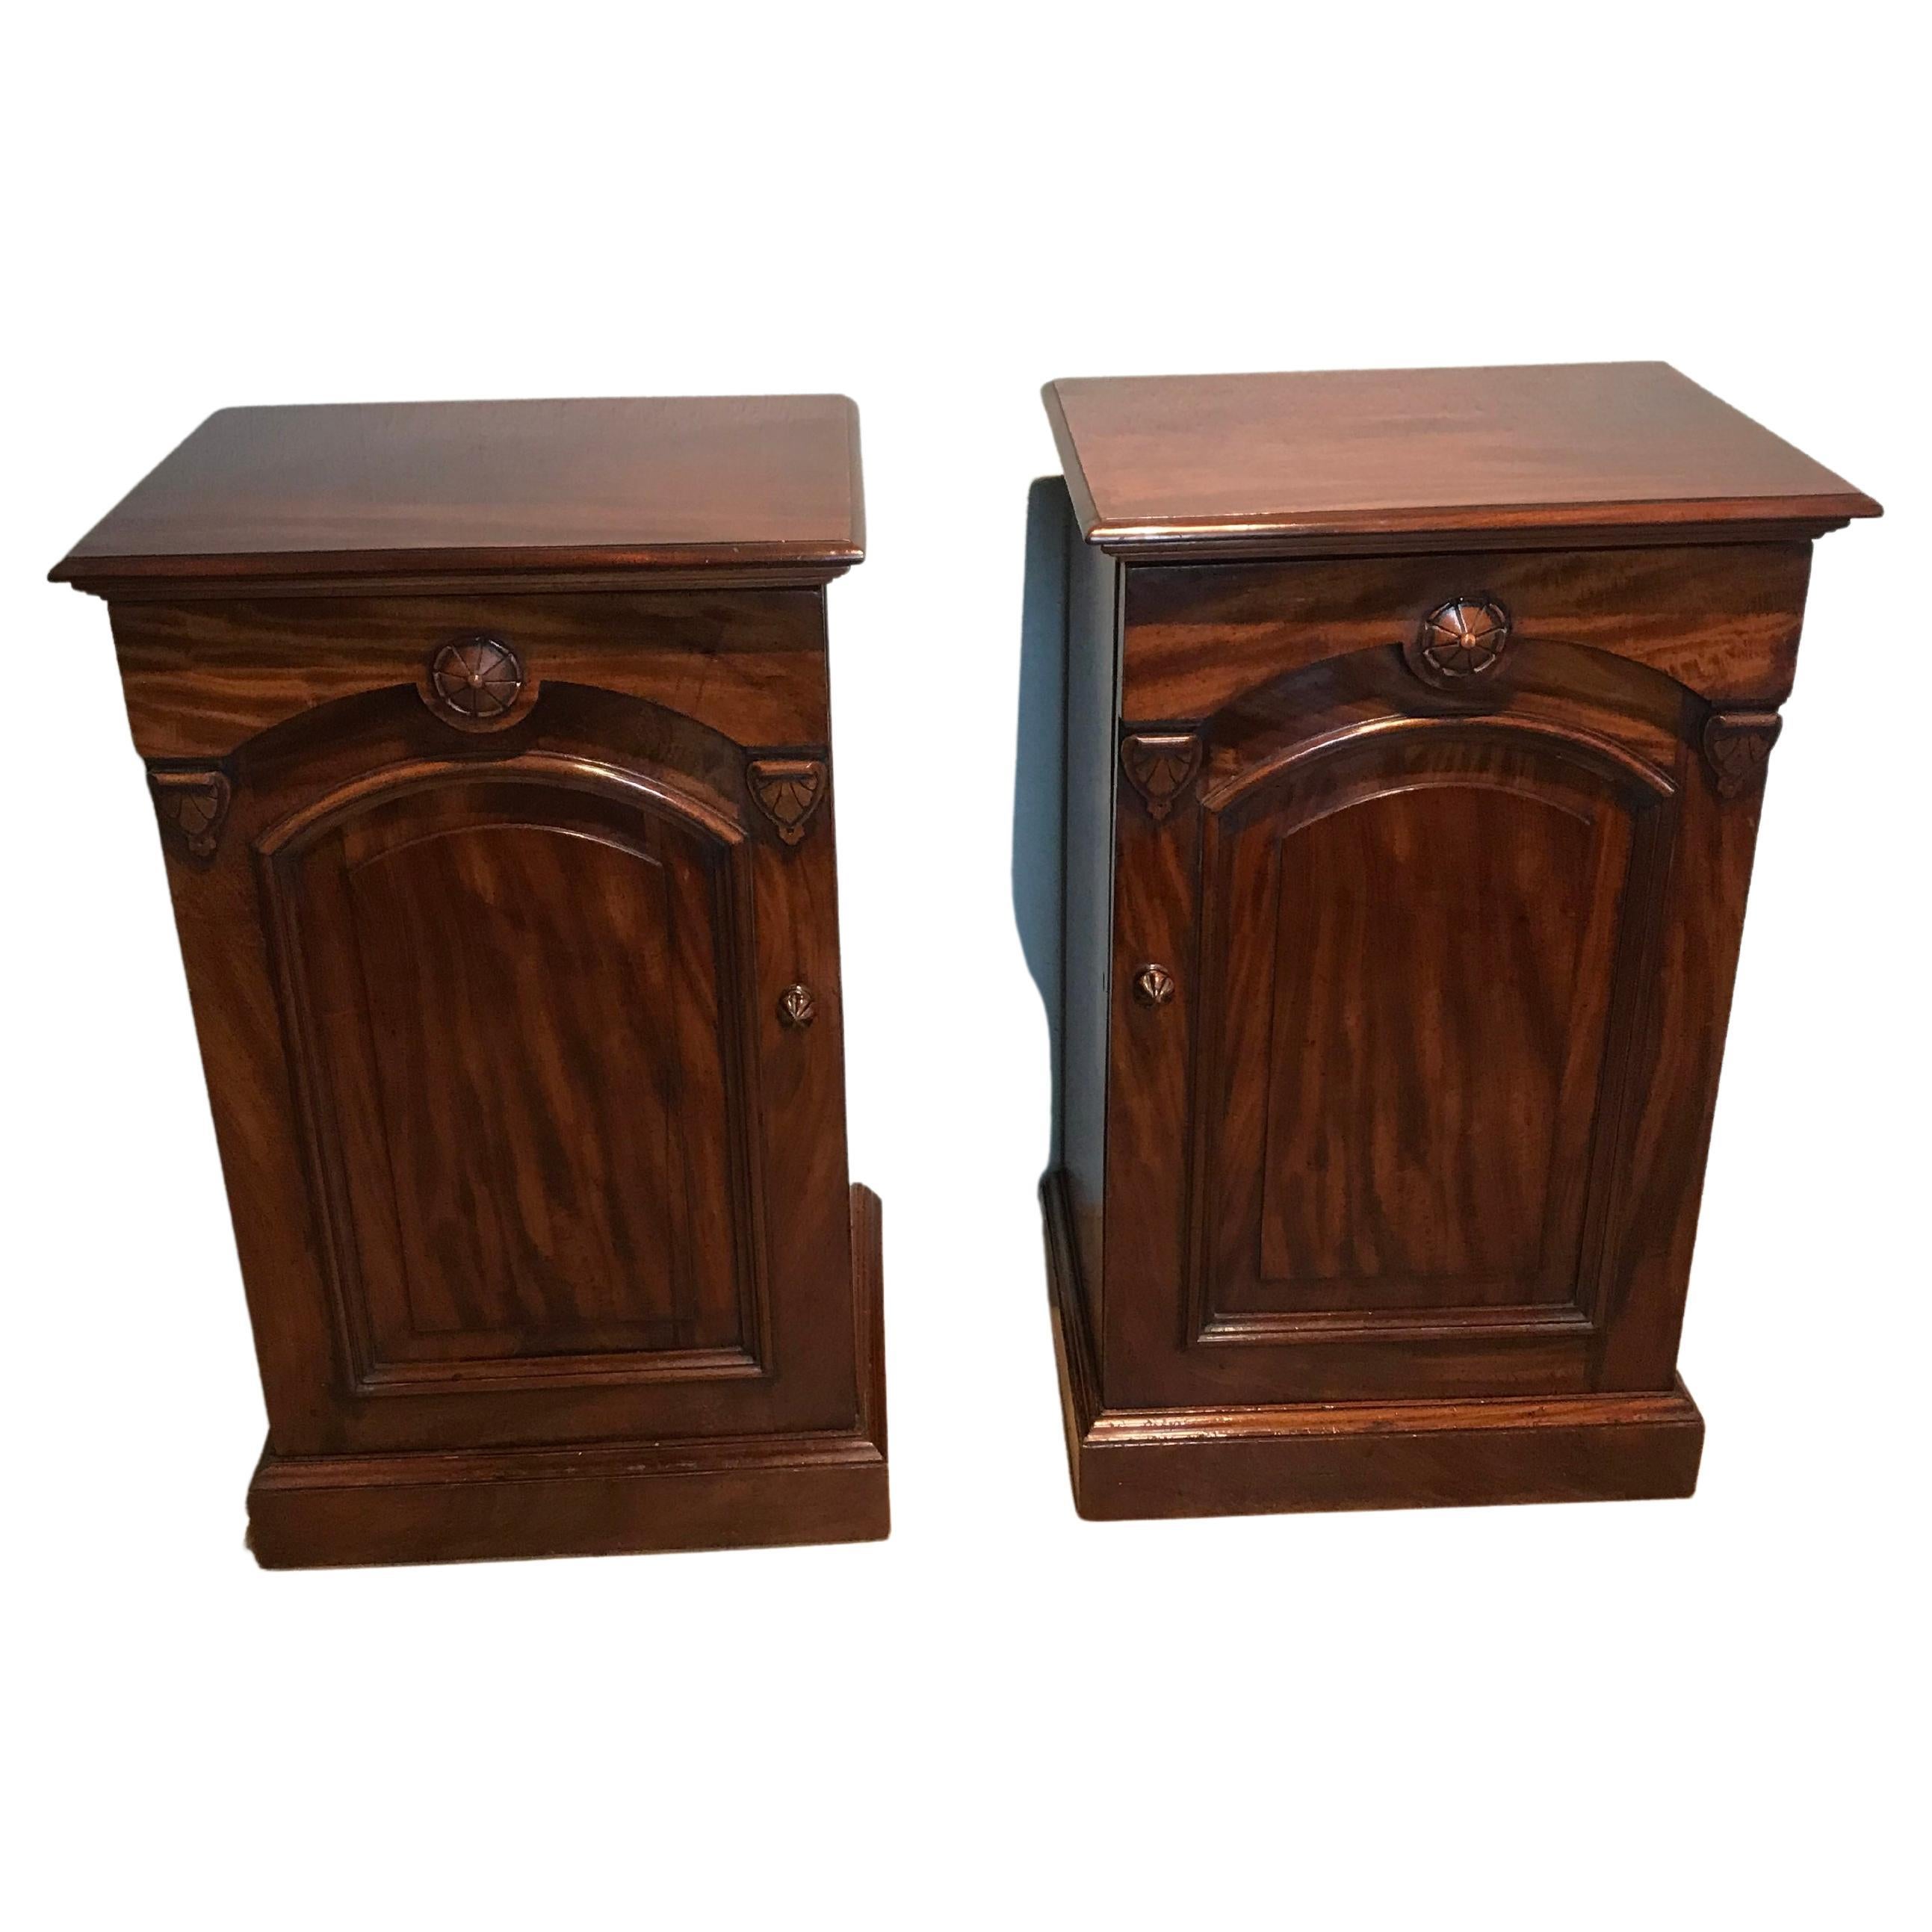 Pair of Pedestal Cabinets